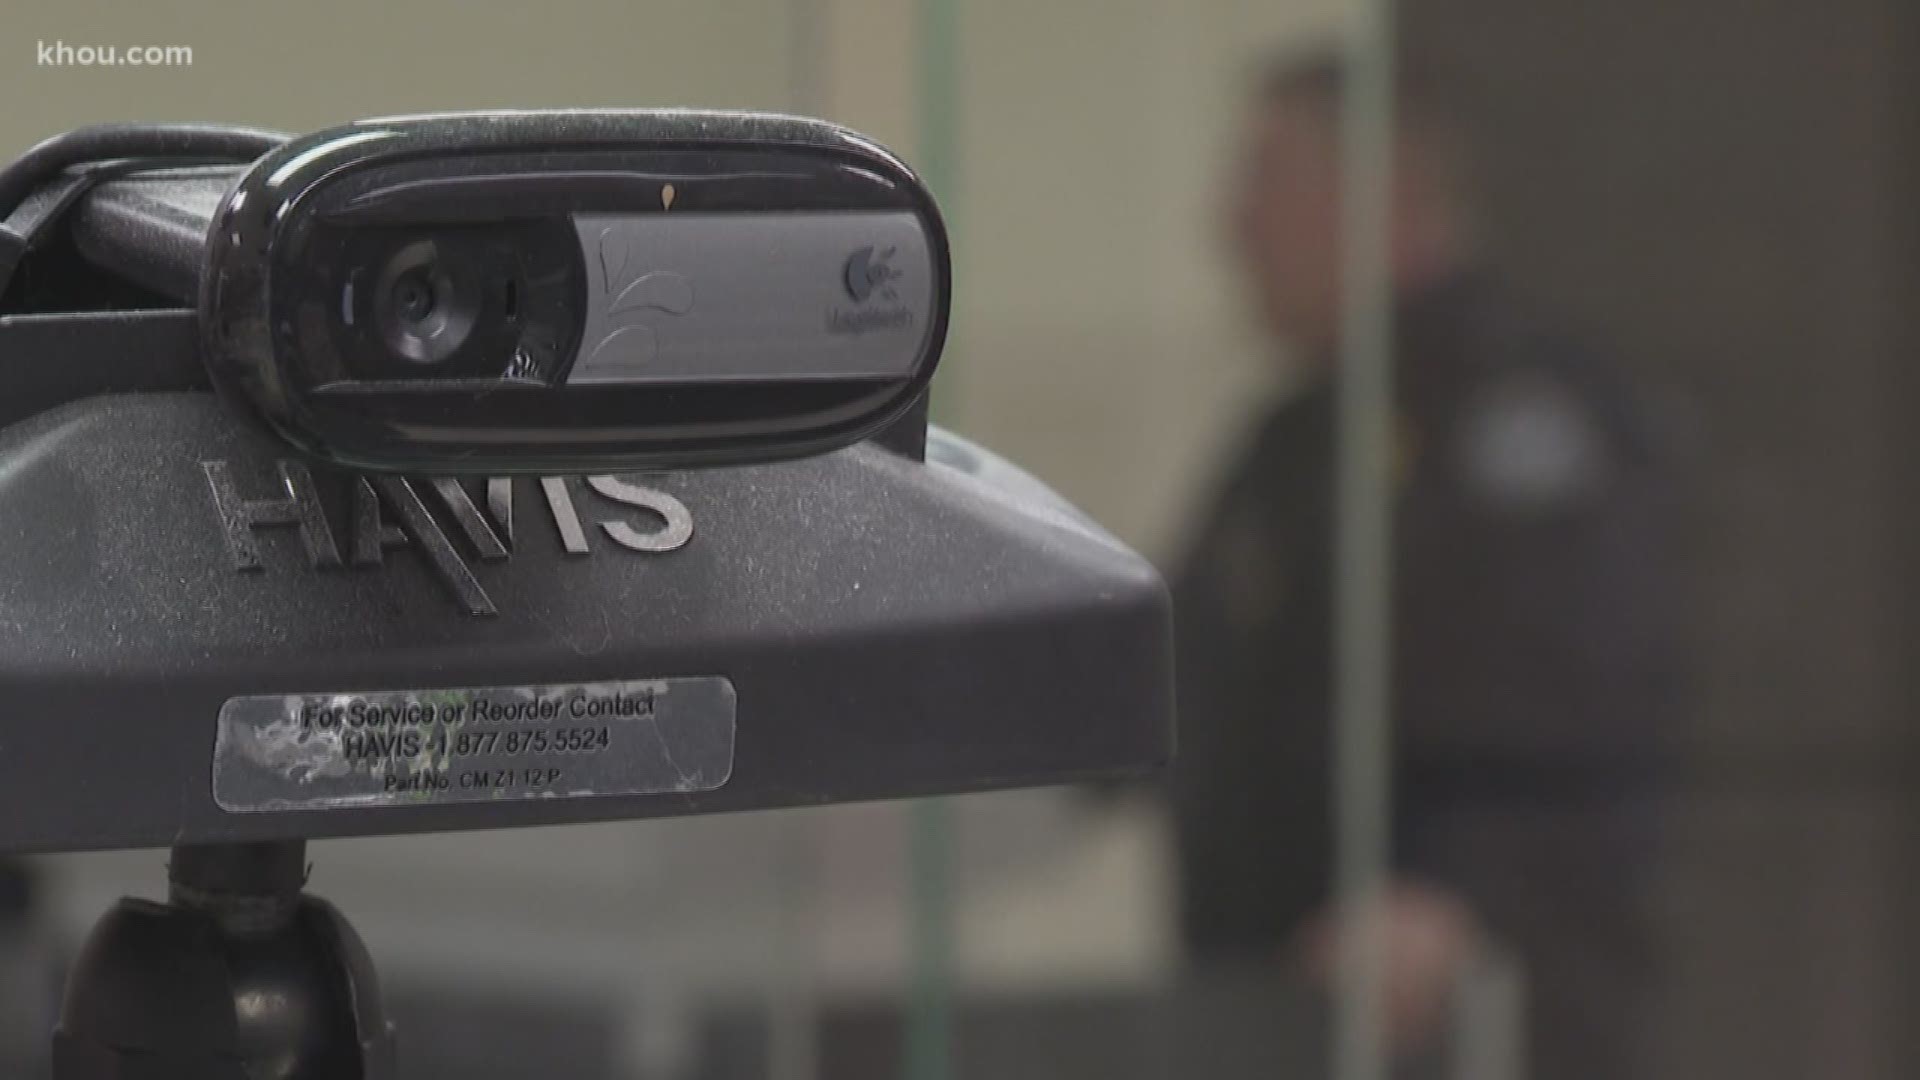 Hobby Airport is the first airport to texas to have facial recognition technology for both arriving and departing international travelers.